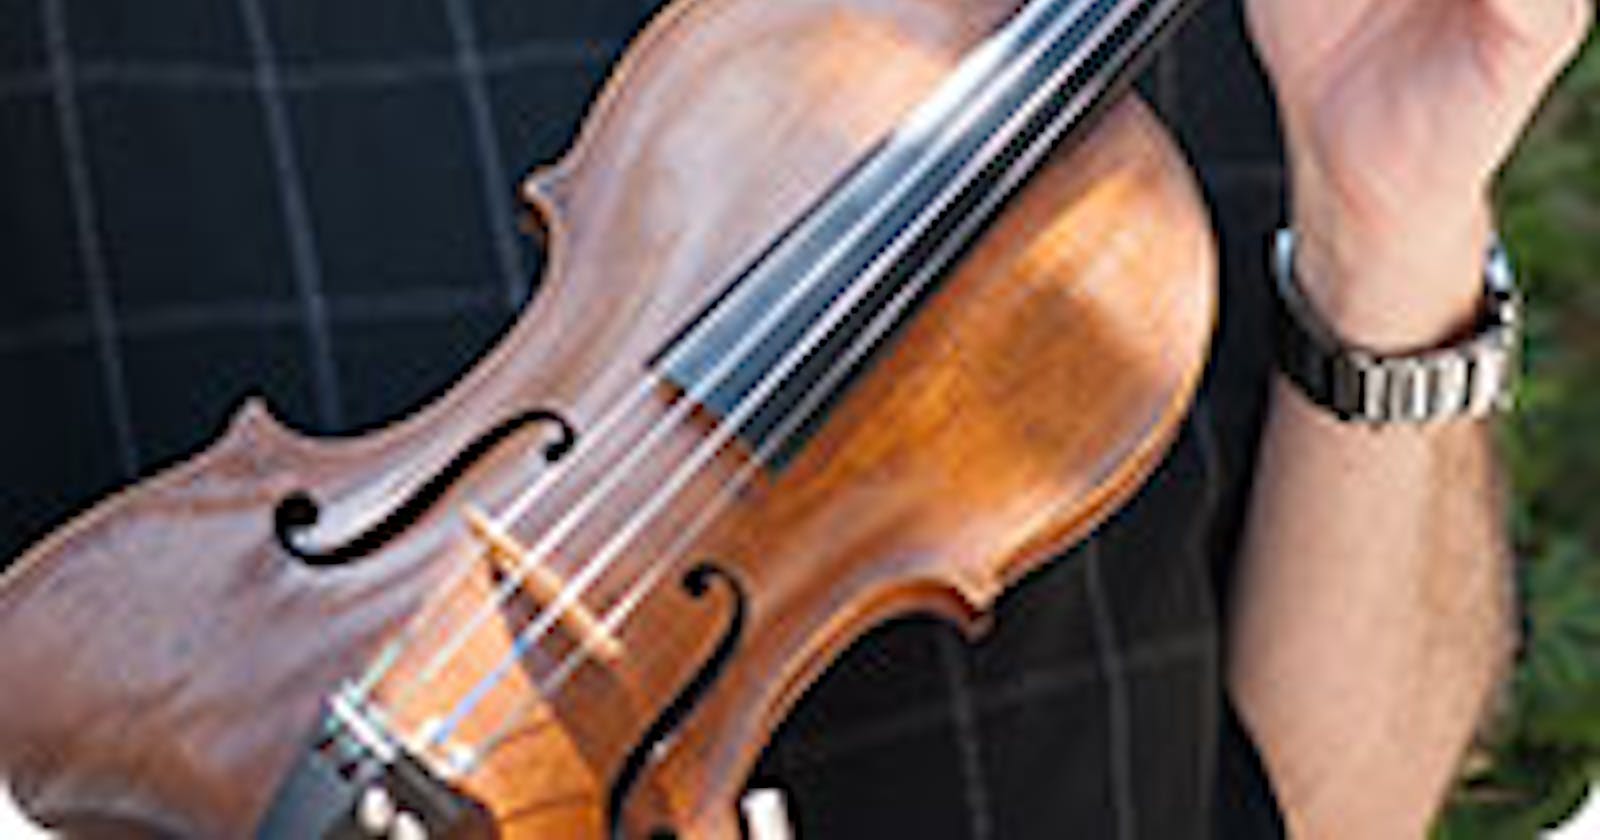 Overcoming Challenges: Common Hurdles Faced by Beginner Violin Students